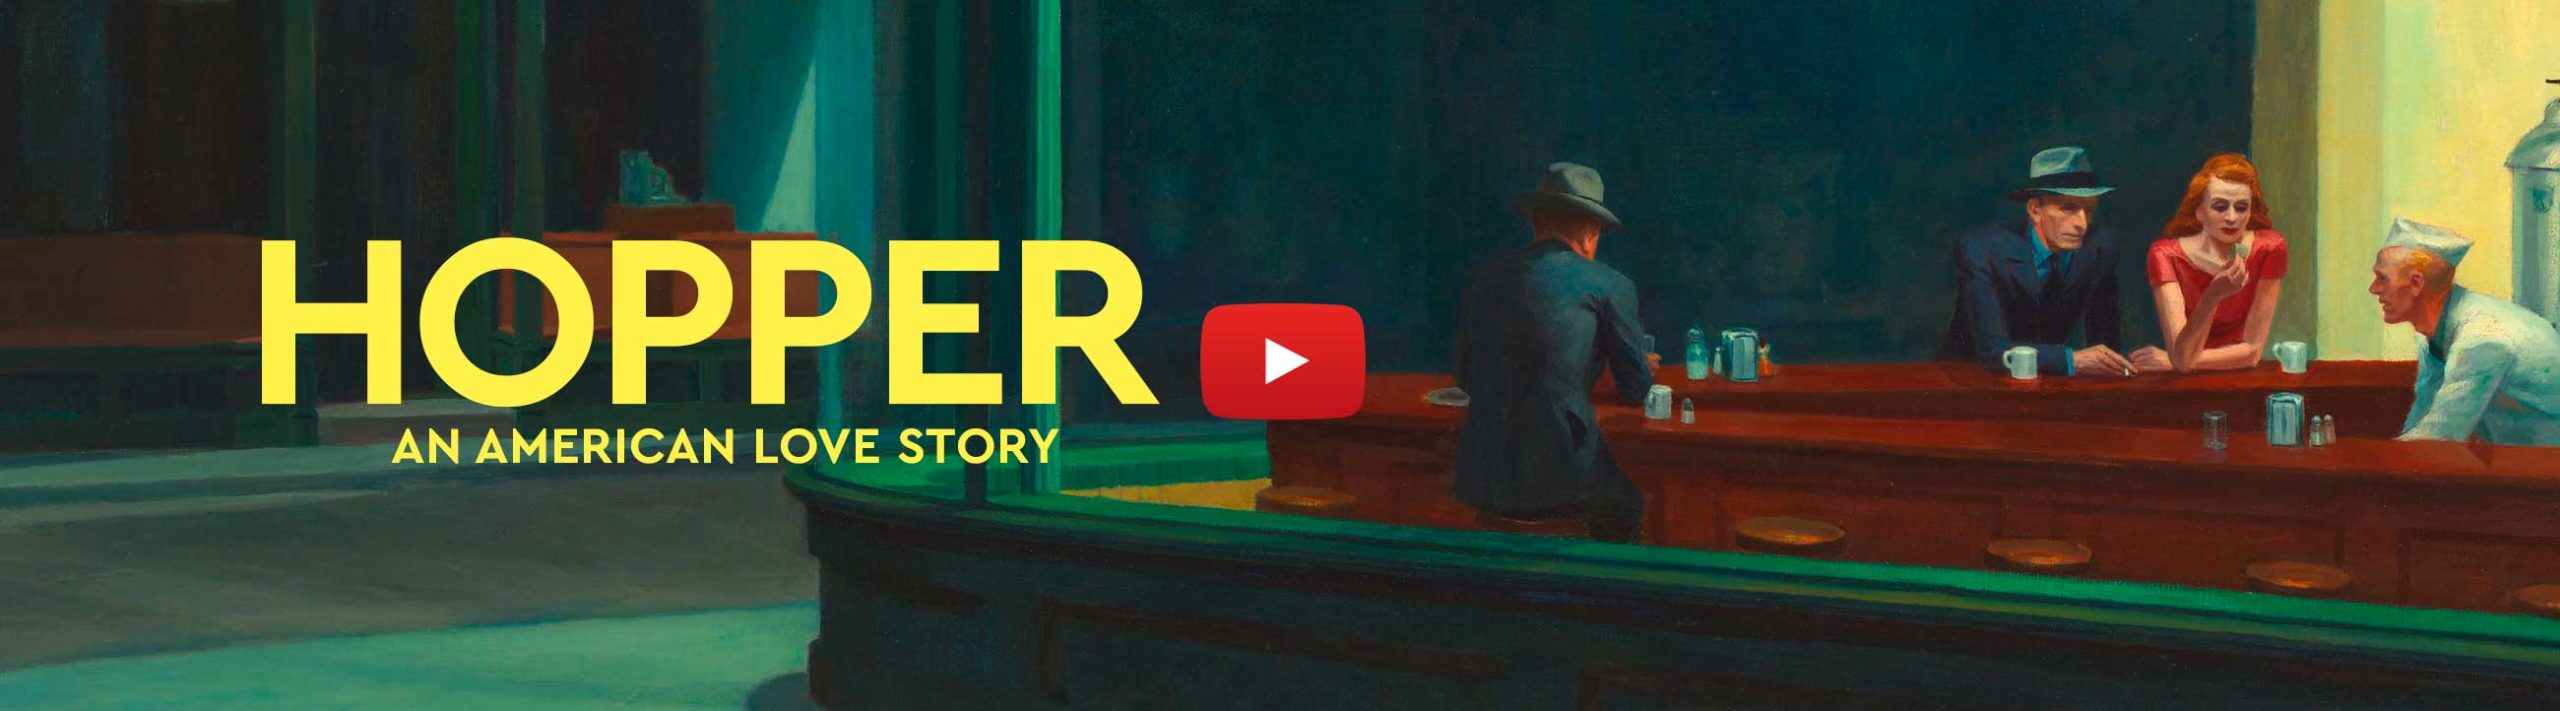 HOPPER: AN AMERICAN LOVE STORY – Exhibition on Screen